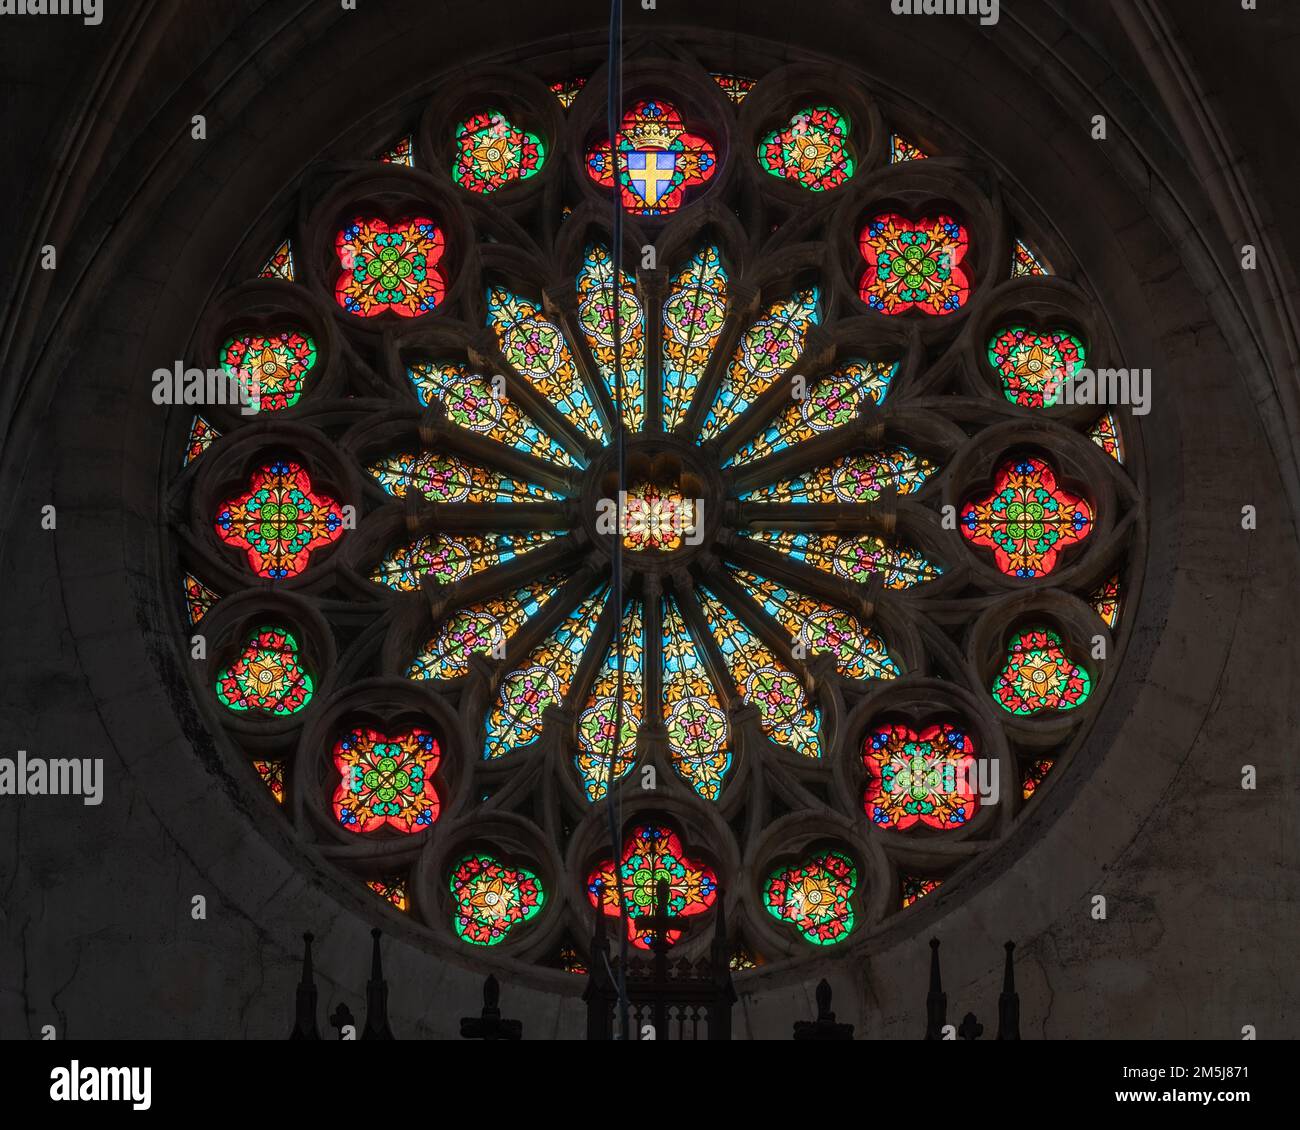 Montpellier, France - 12 29 2022 : View of colorful stained glass rosette above main entrance of ancient St Roch or Saint Roch church Stock Photo